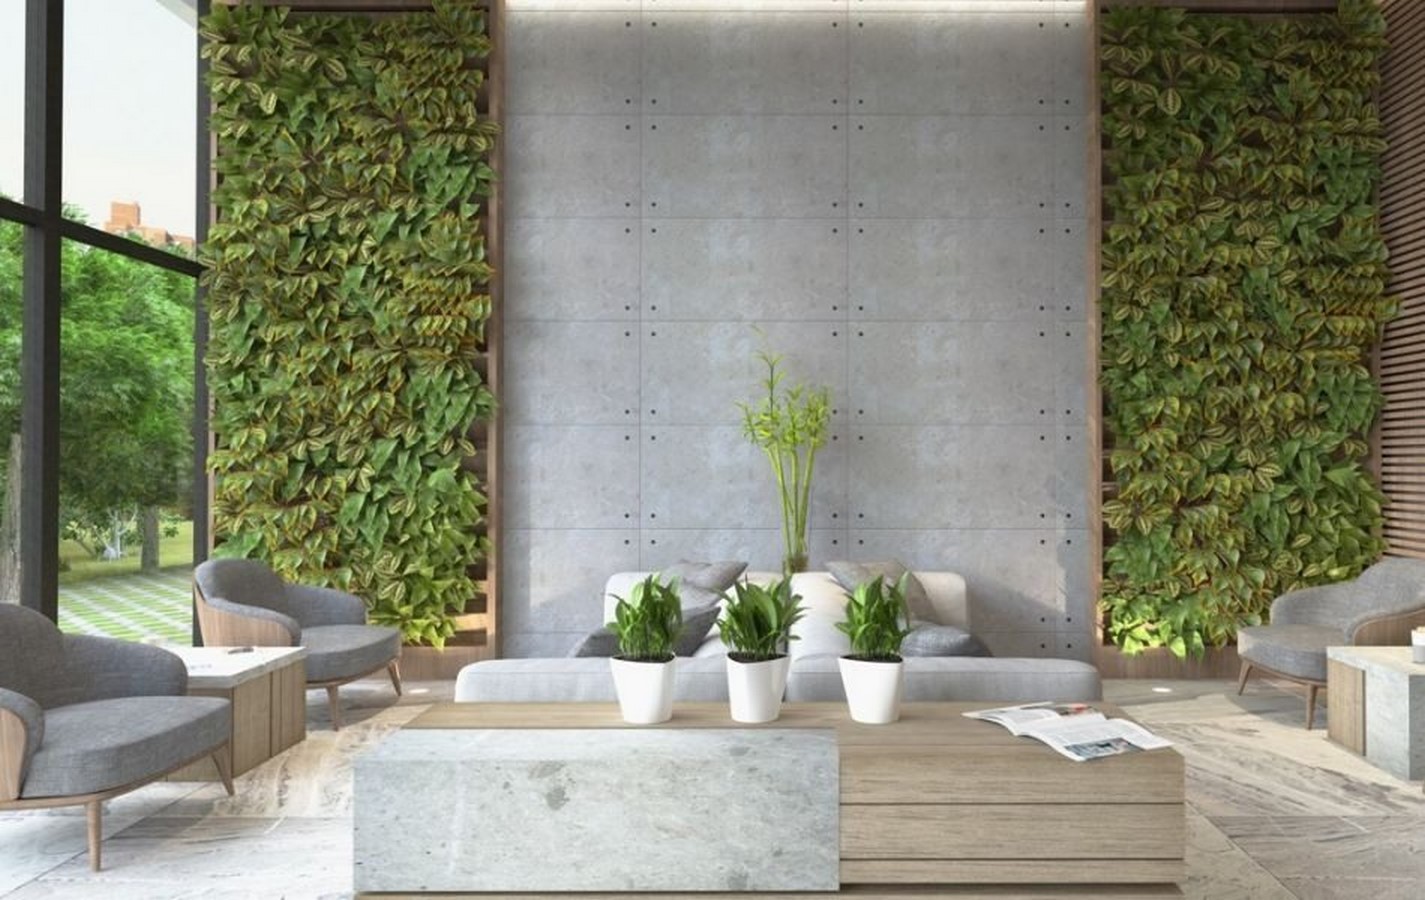 Adding greens in the interior spaces